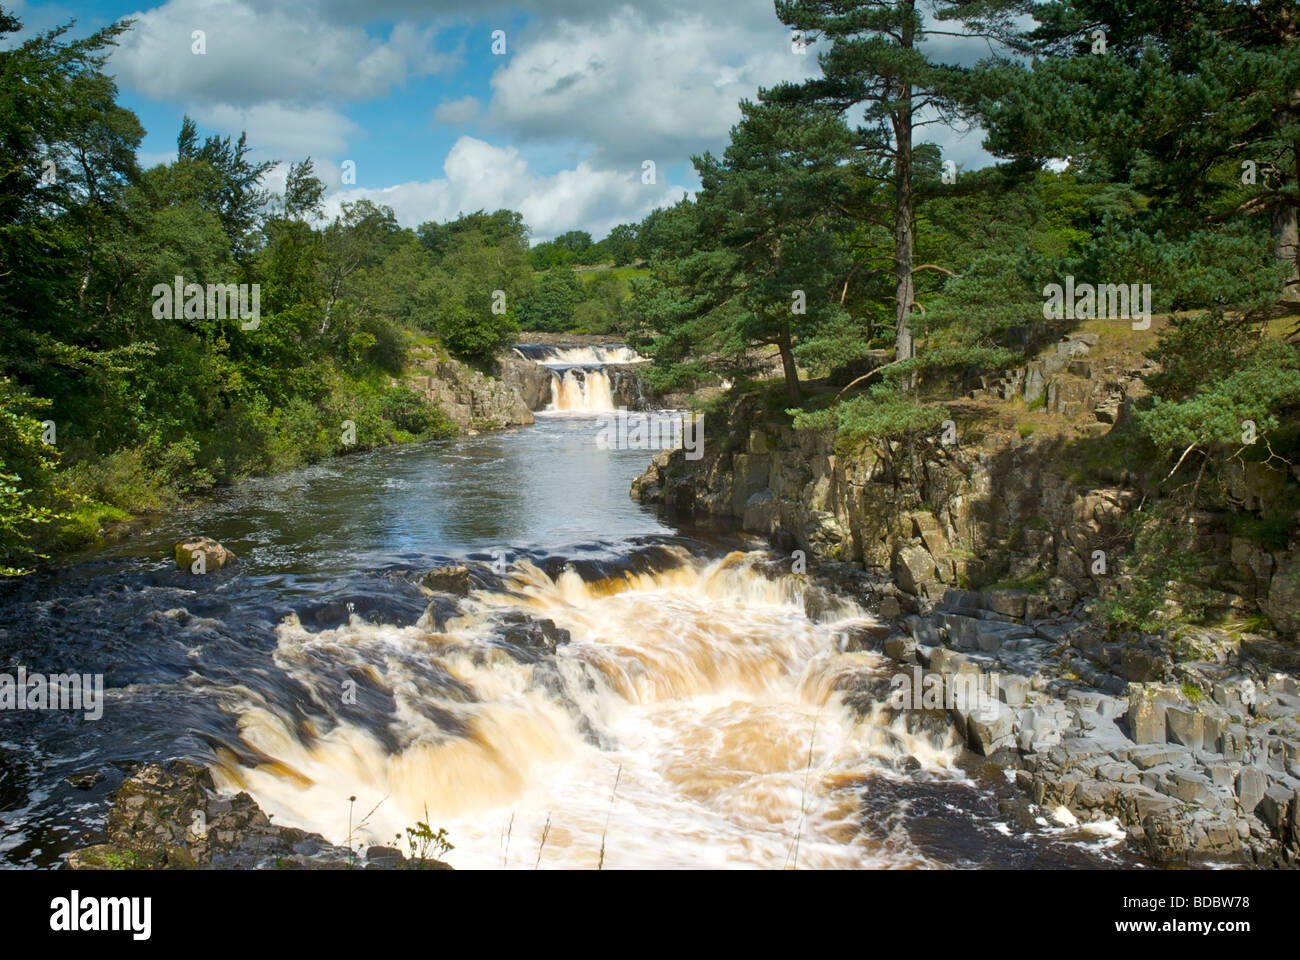 Low Force waterfall on River Tees, Upper Teesdale, Northumberland National Park, England UK Stock Photo